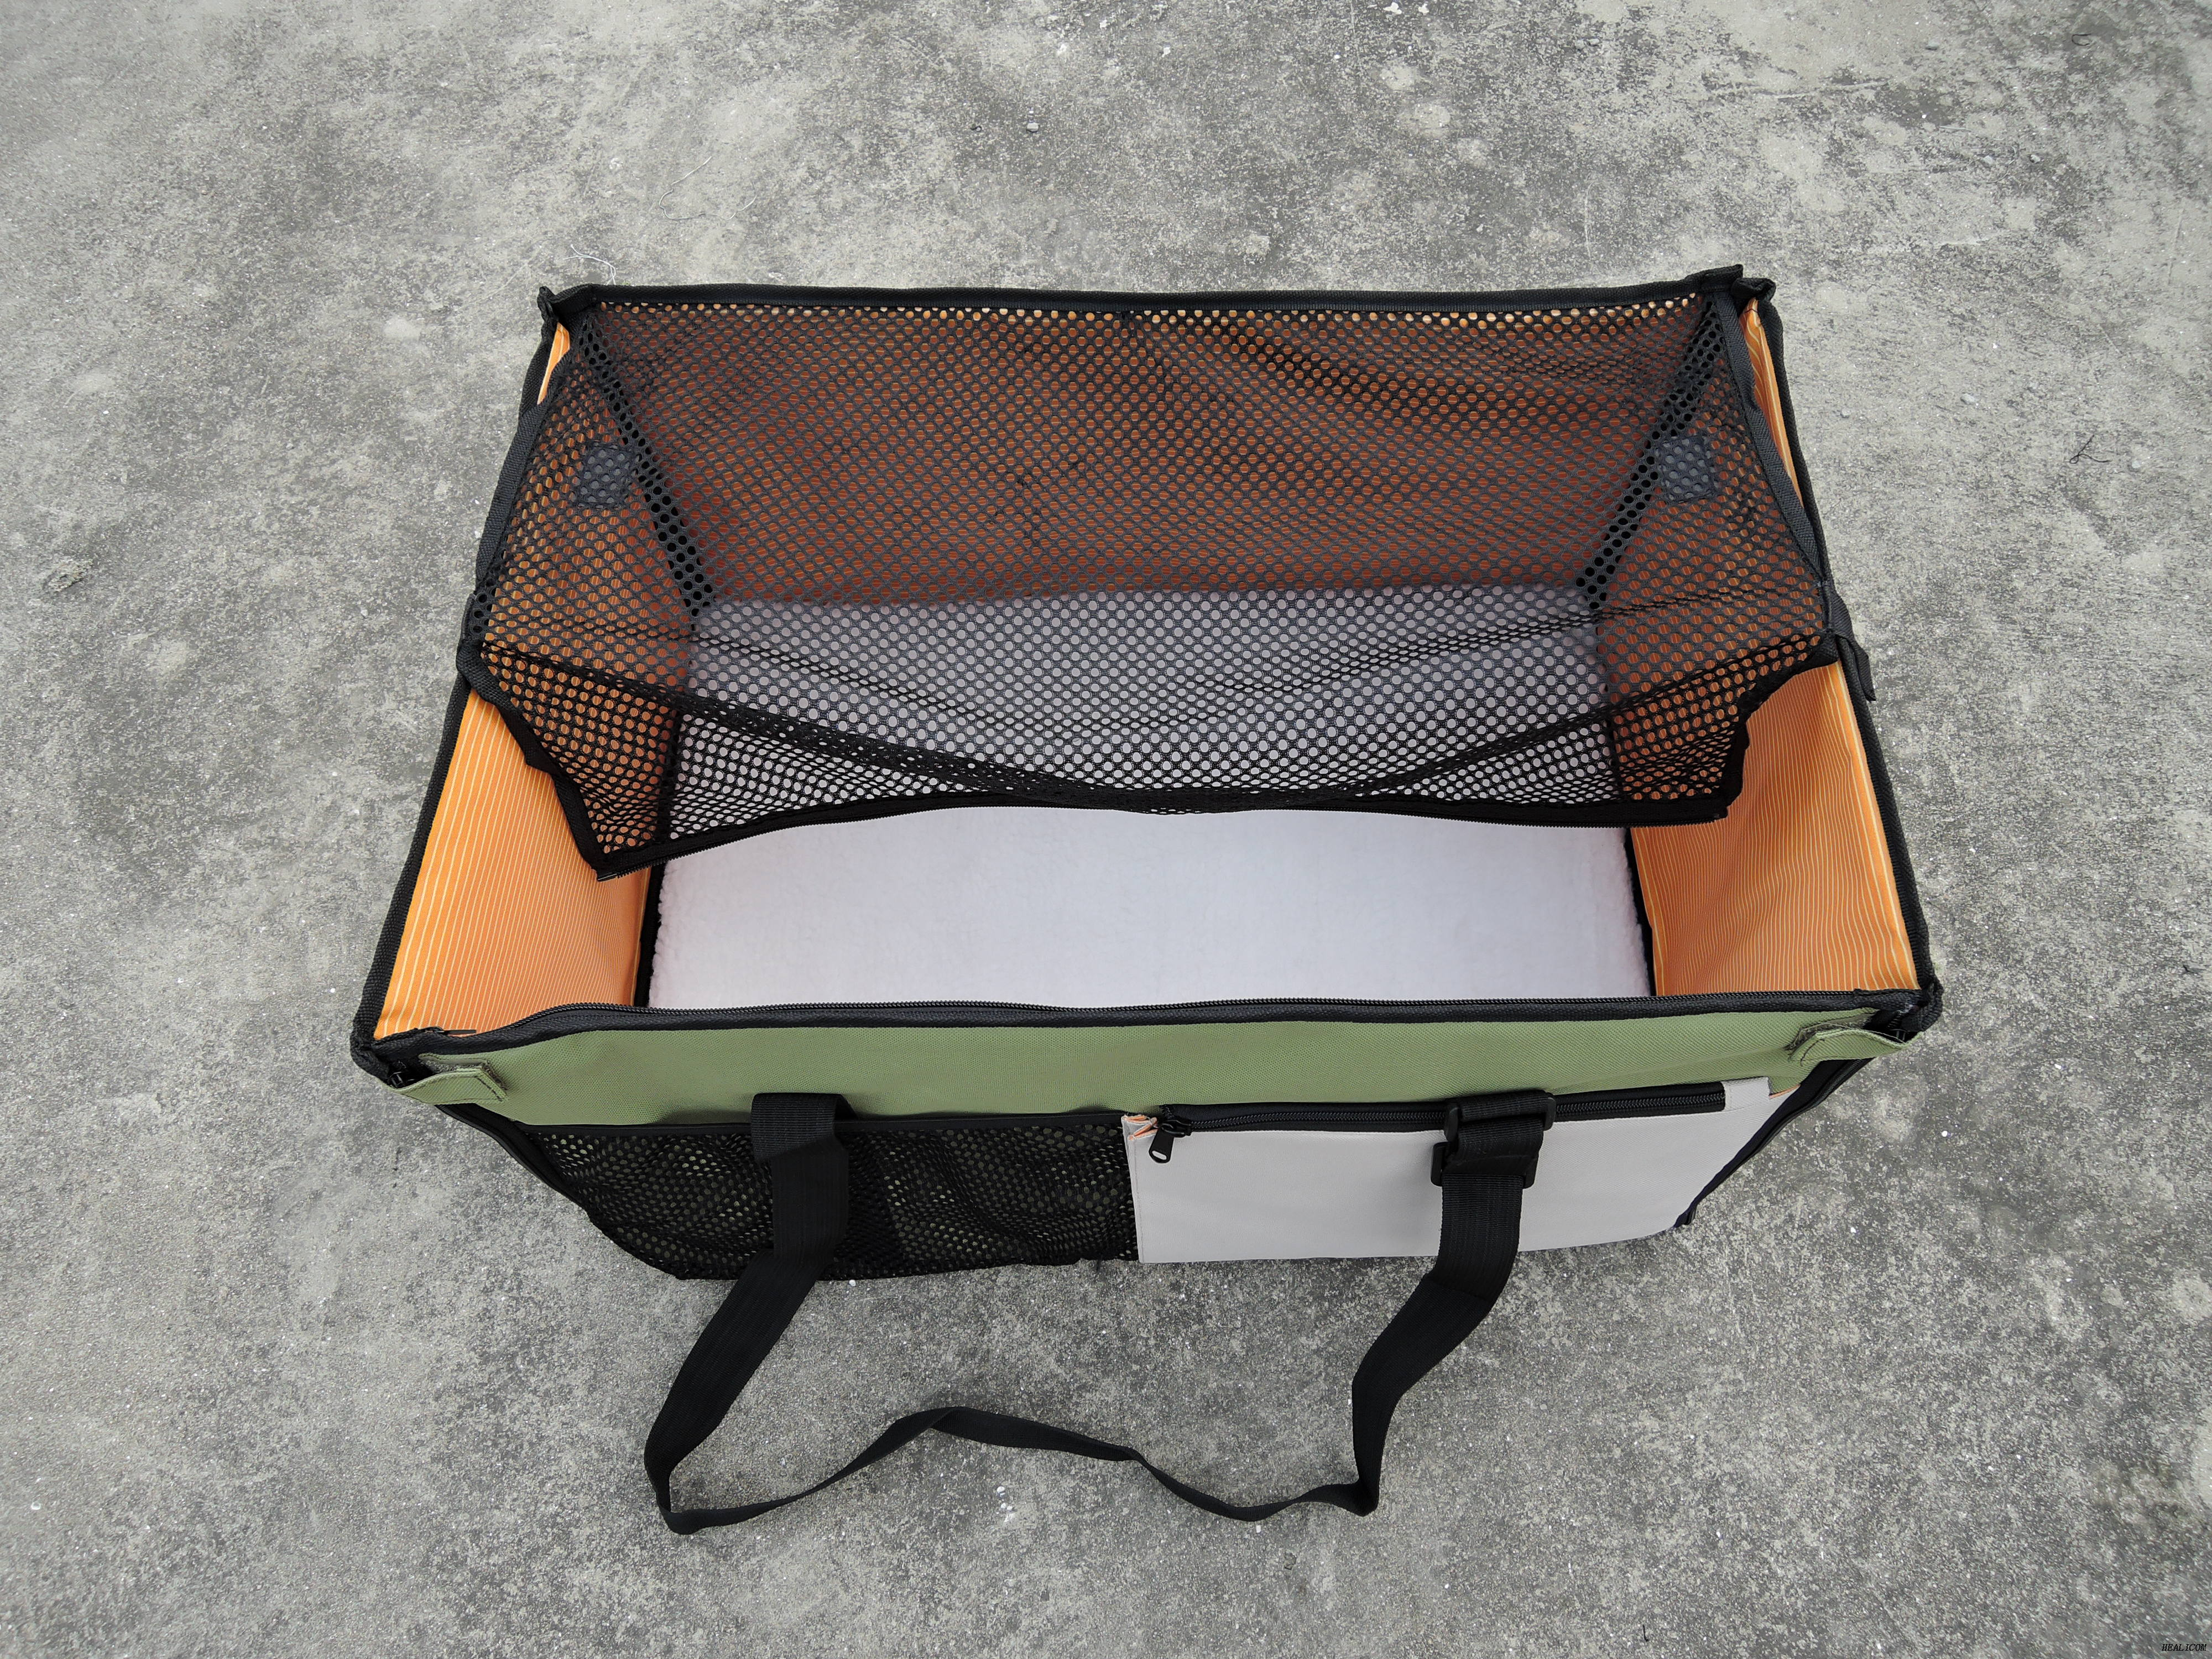 TPC0004 Portable Mesh window folding Pet Car Booster Seat for safe travel Comfortable breathable 